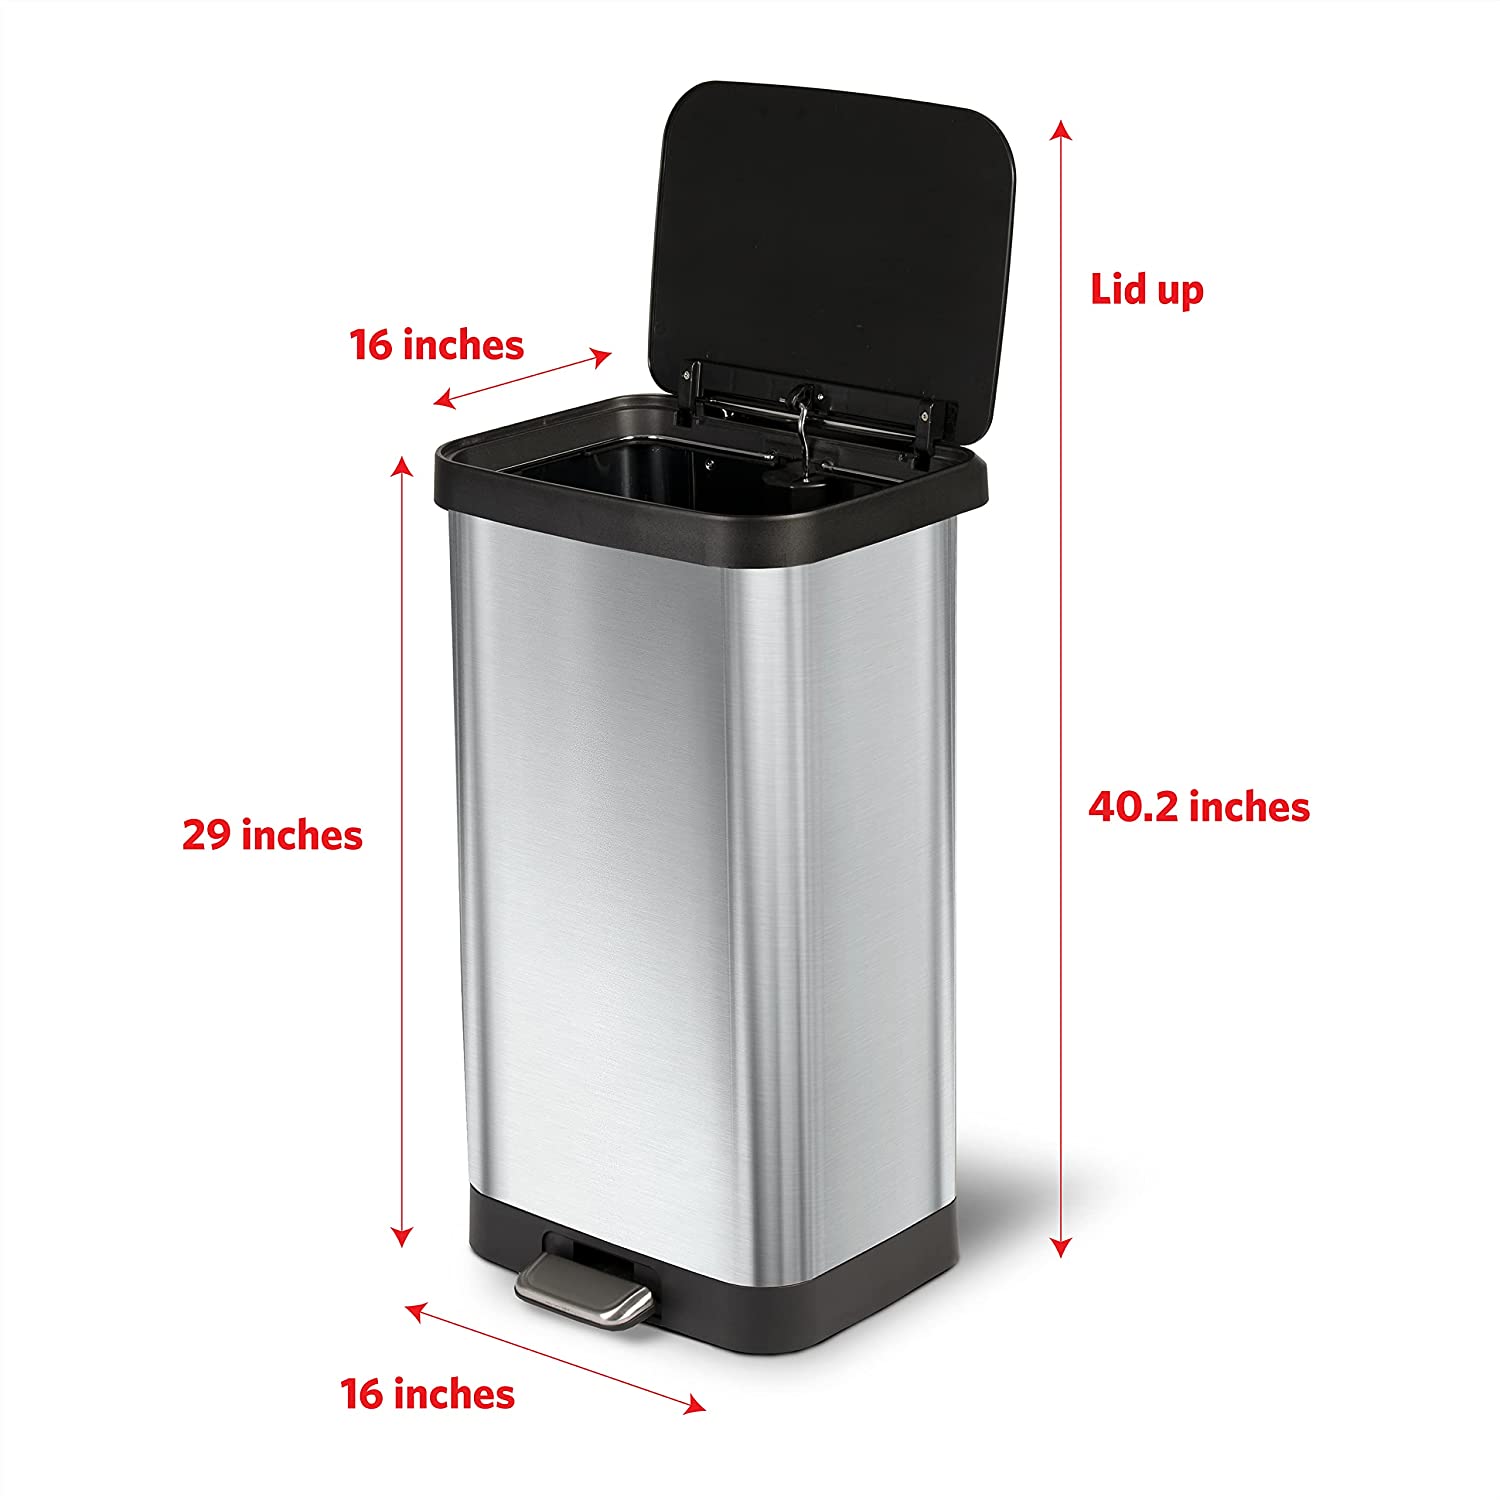 Stainless Steel 16 Gallon Step Trash Can, Home Storage & Organization